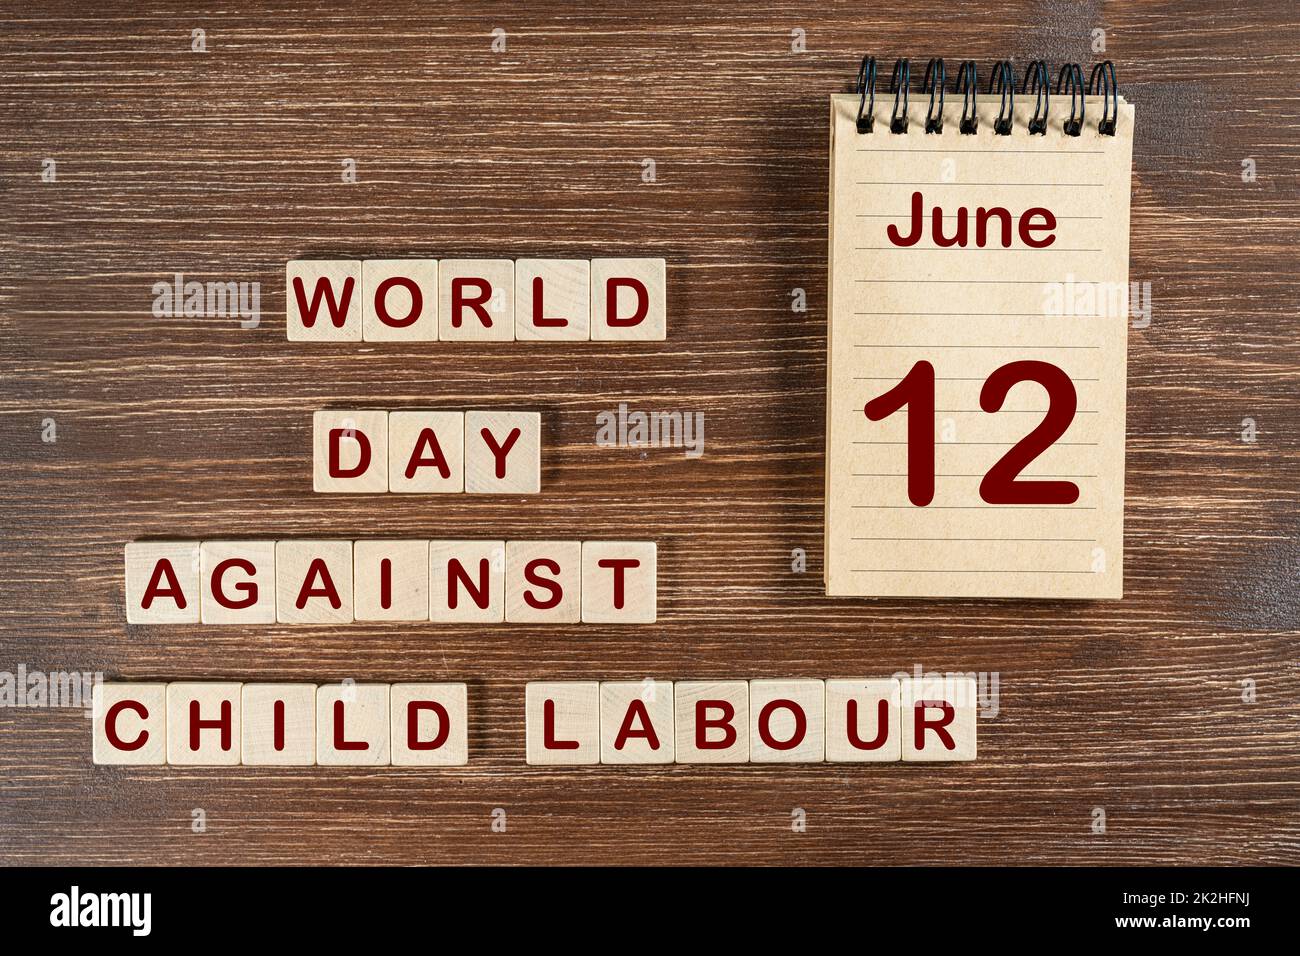 World Day Against Child Labour Stock Photo